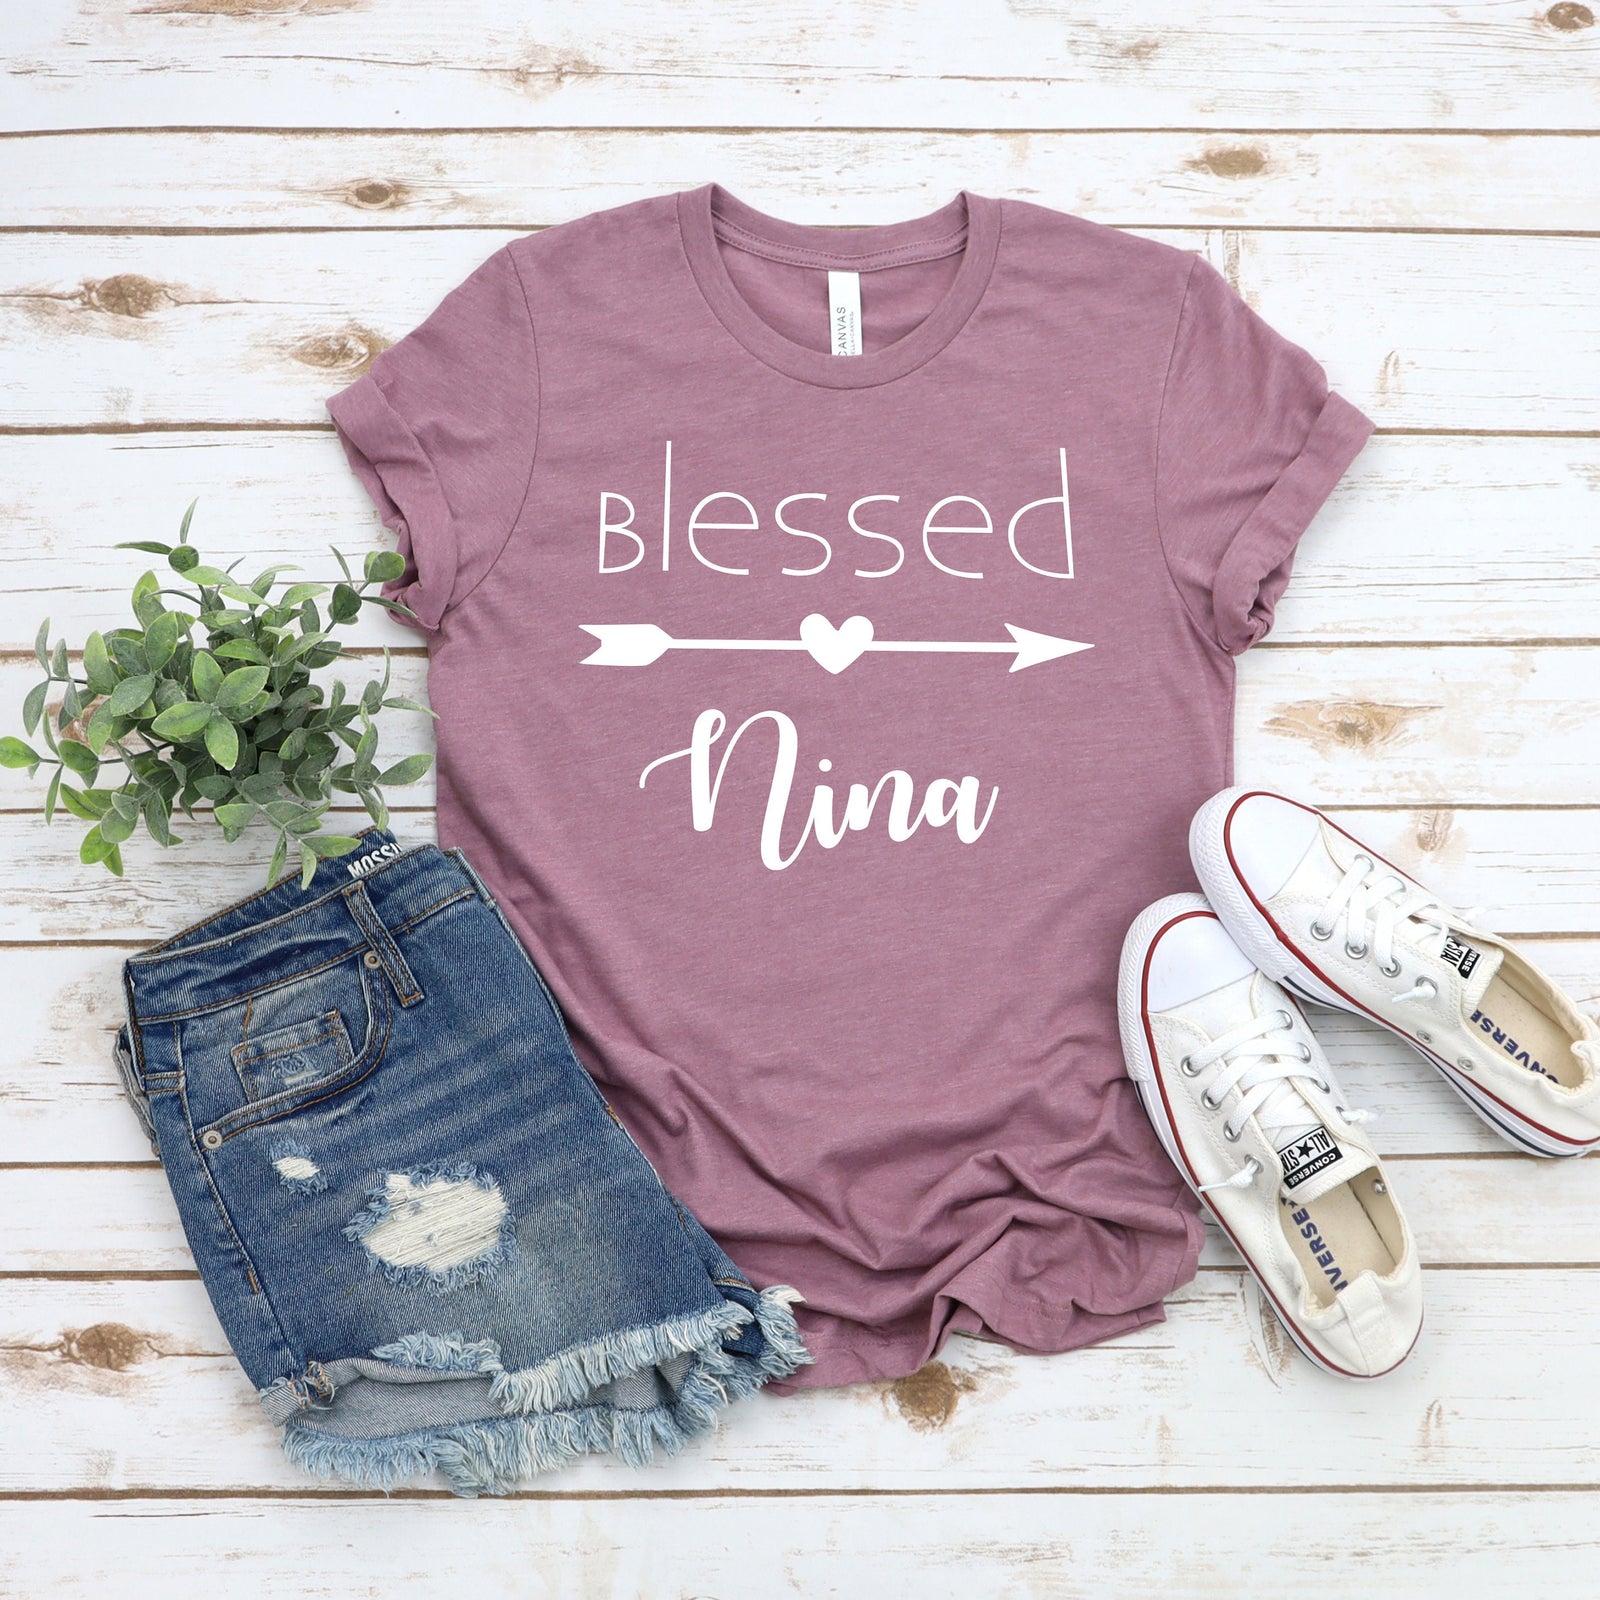 Blessed Nina T Shirt - Personalized Blessed Shirt - Custom Name Blessed Shirt - Custom Blessed Shirt